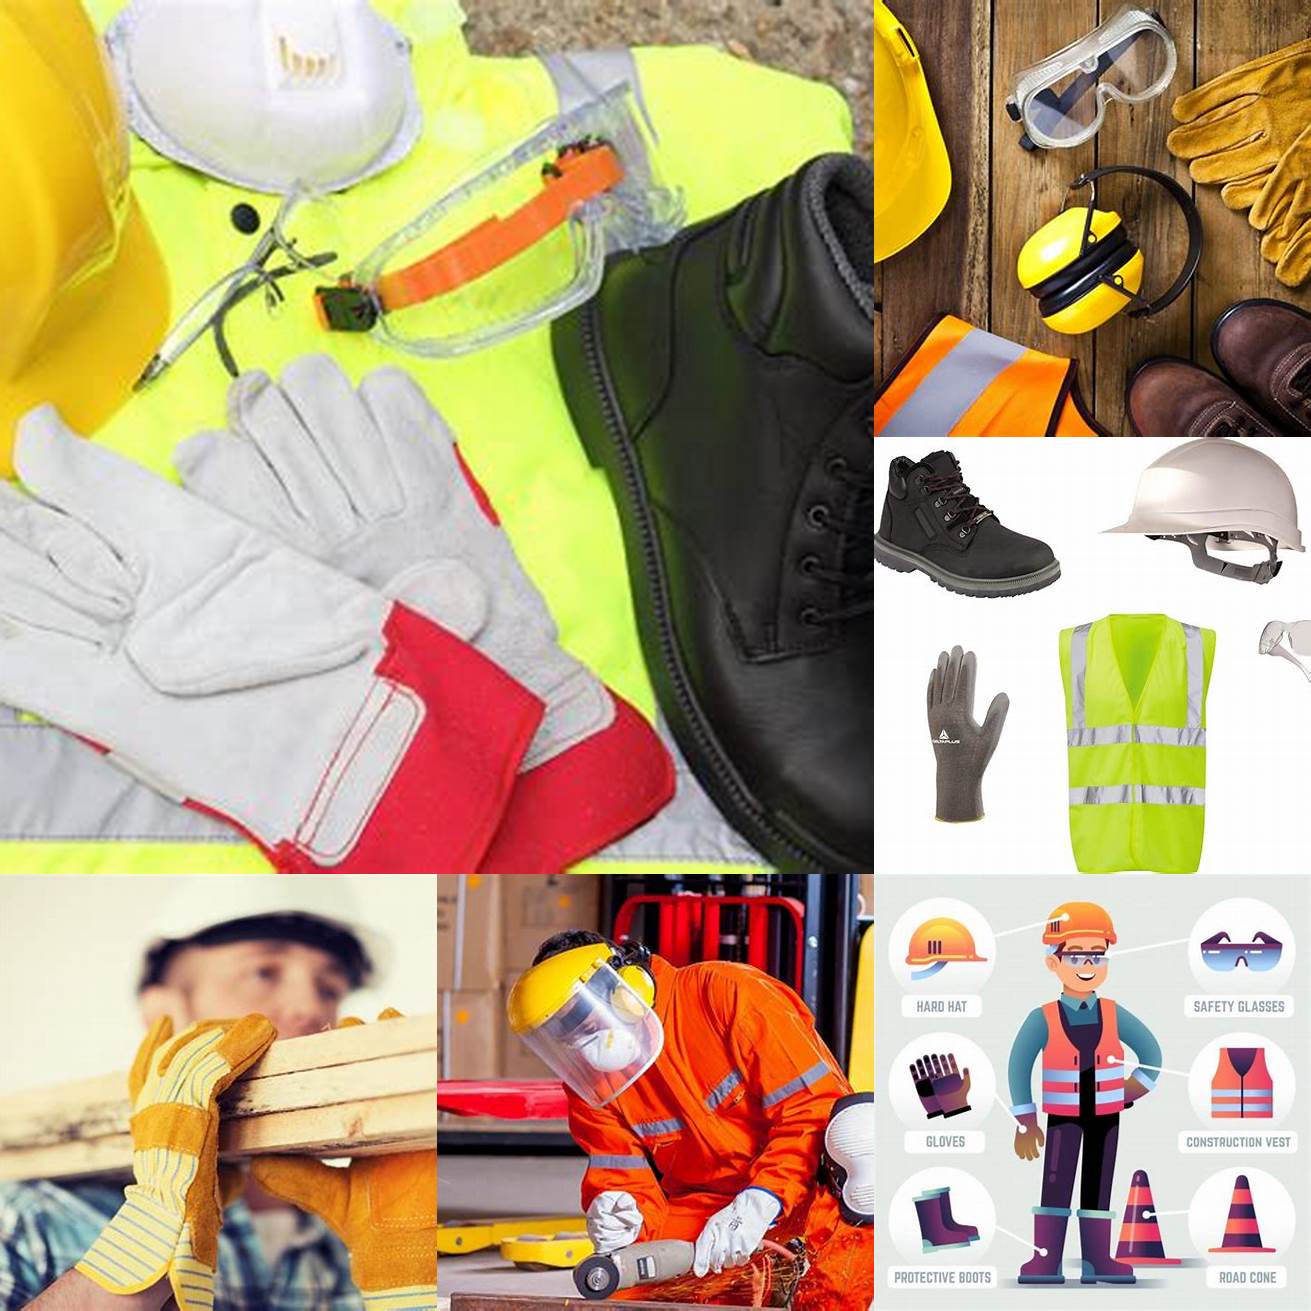 - Use protective gear such as gloves and safety glasses when working with power tools